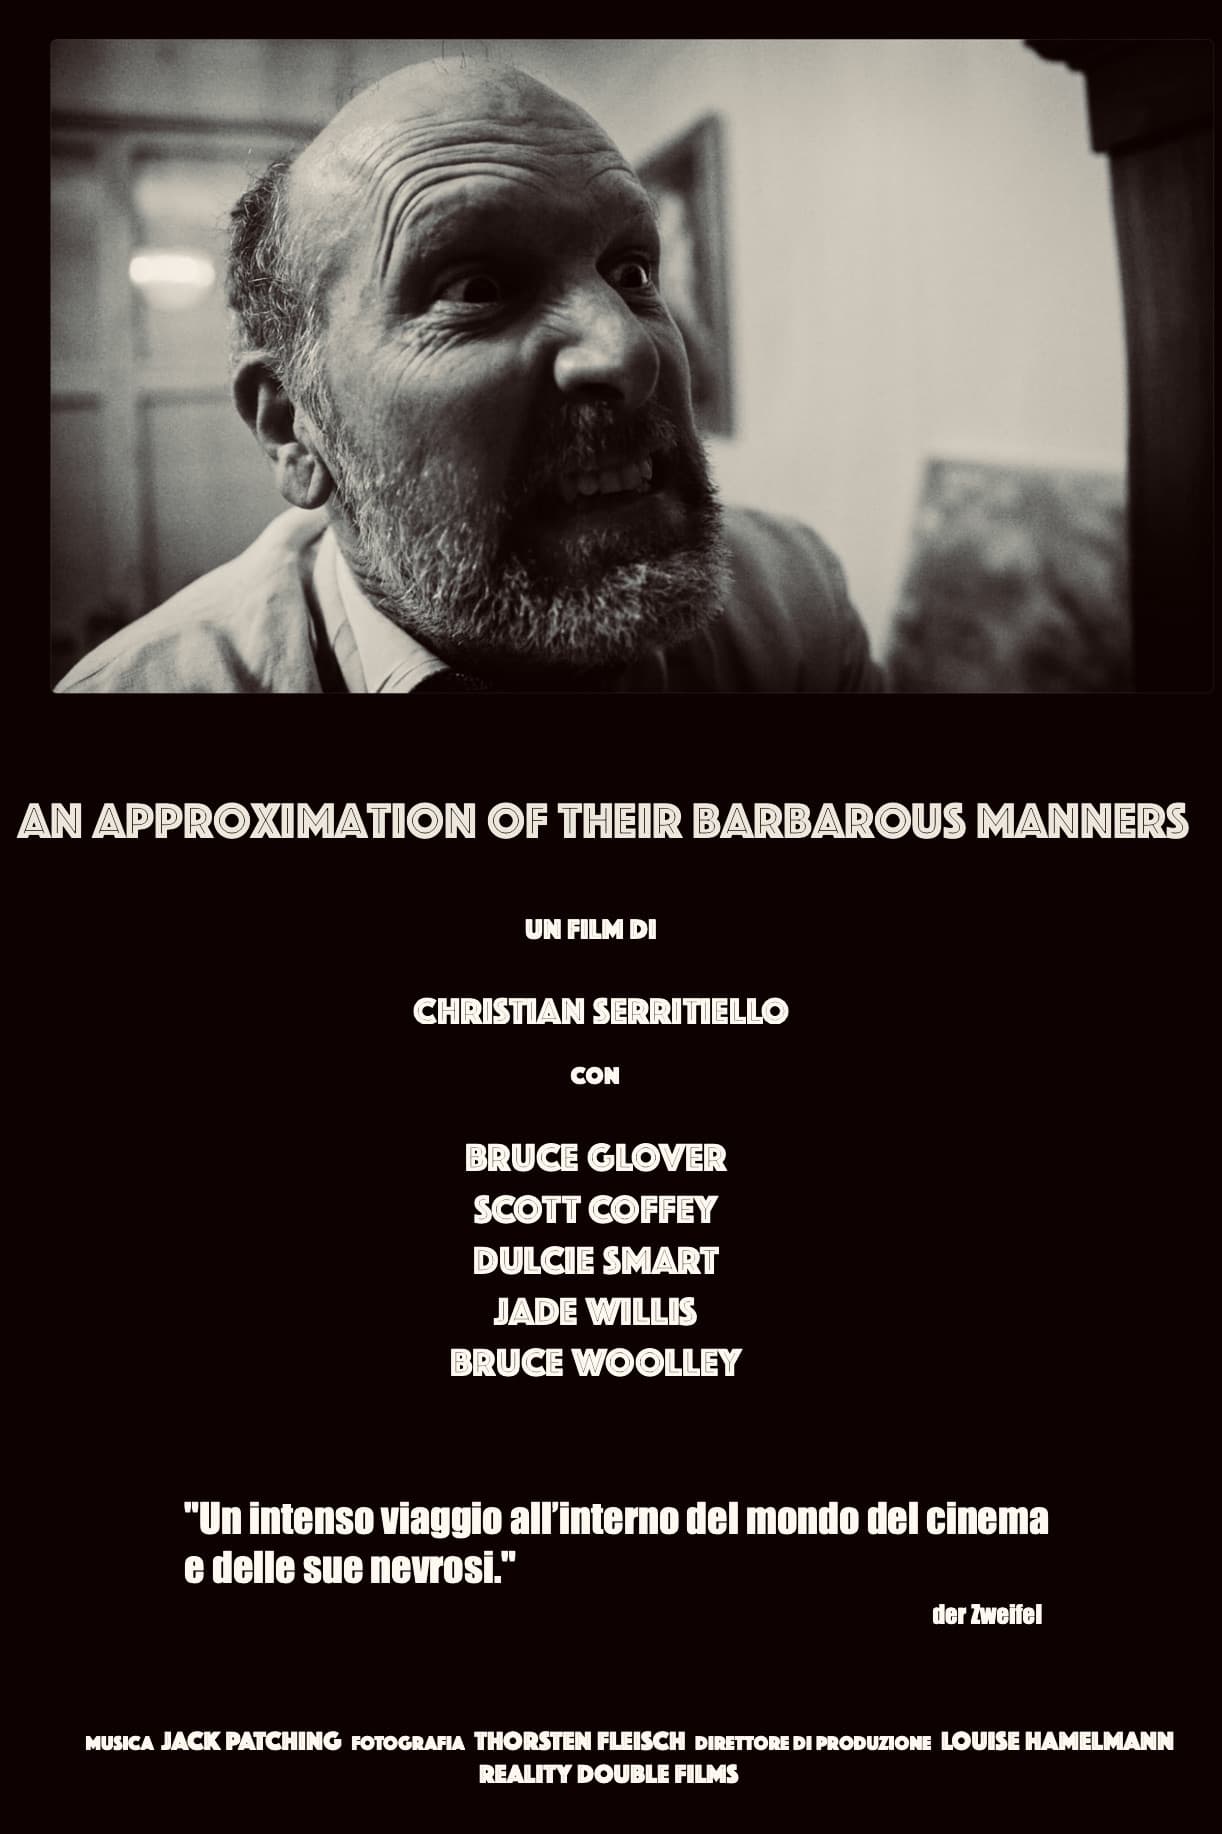 An Approximation of their Barbarous Manners